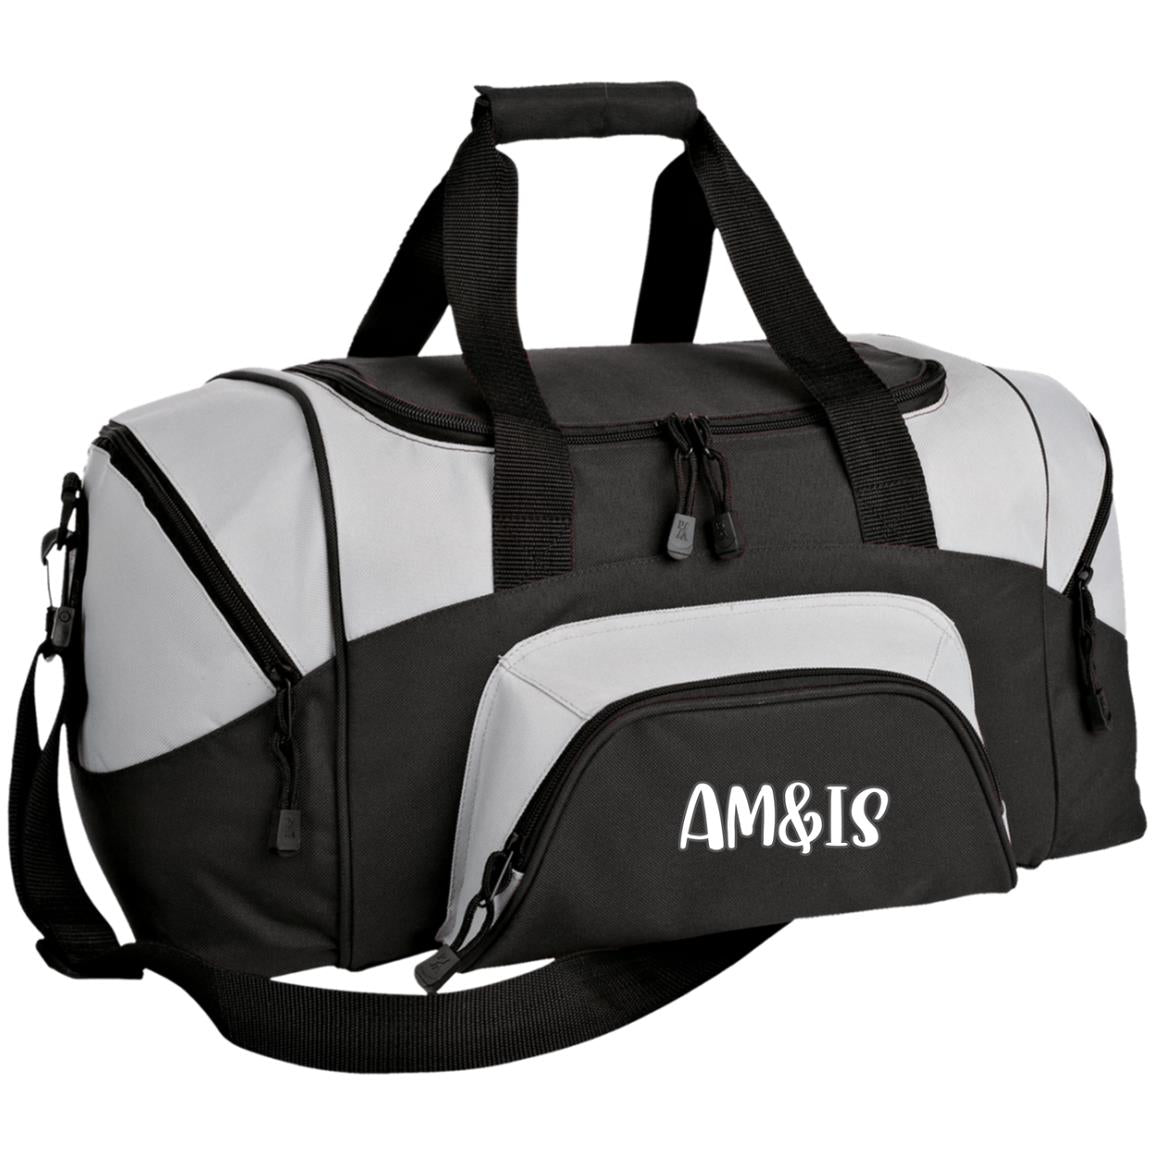 BLACK/GRAY ONE SIZE - AM&IS Activewear Small Colorblock Sport Duffel Bag - duffel bag at TFC&H Co.